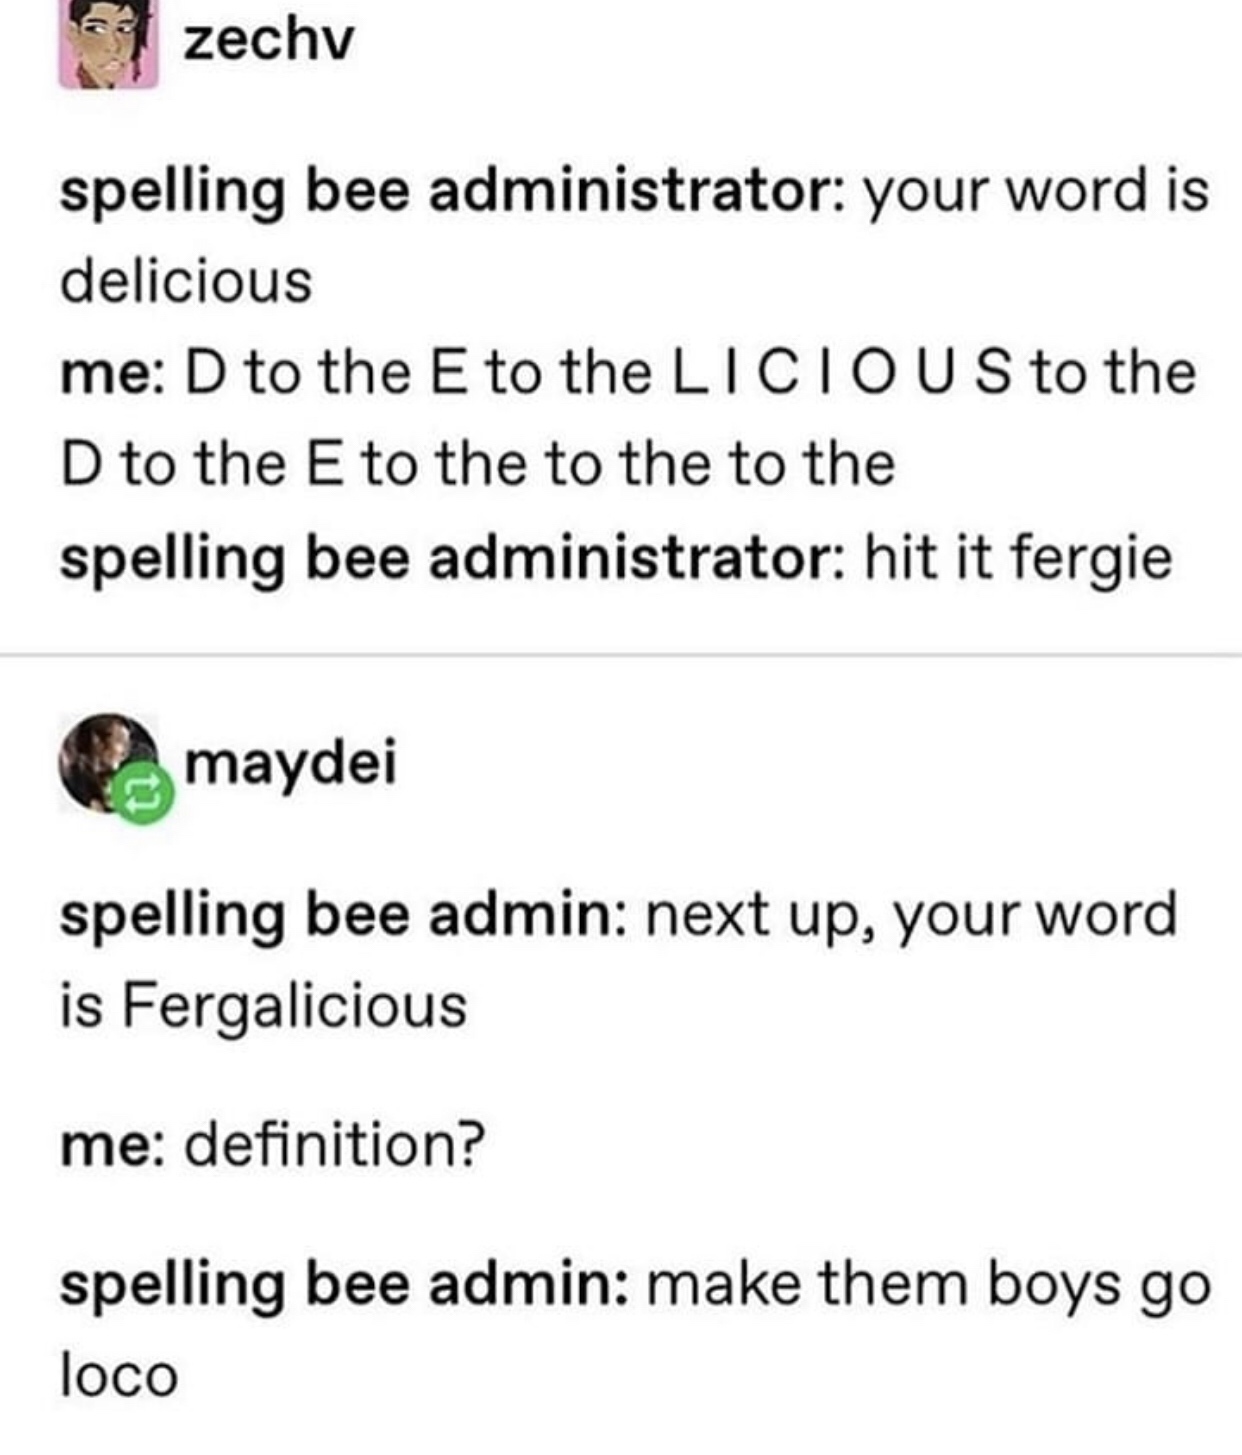 document - zechy spelling bee administrator your word is delicious me D to the E to the Licious to the D to the E to the to the to the spelling bee administrator hit it fergie maydei spelling bee admin next up, your word is Fergalicious me definition? spe